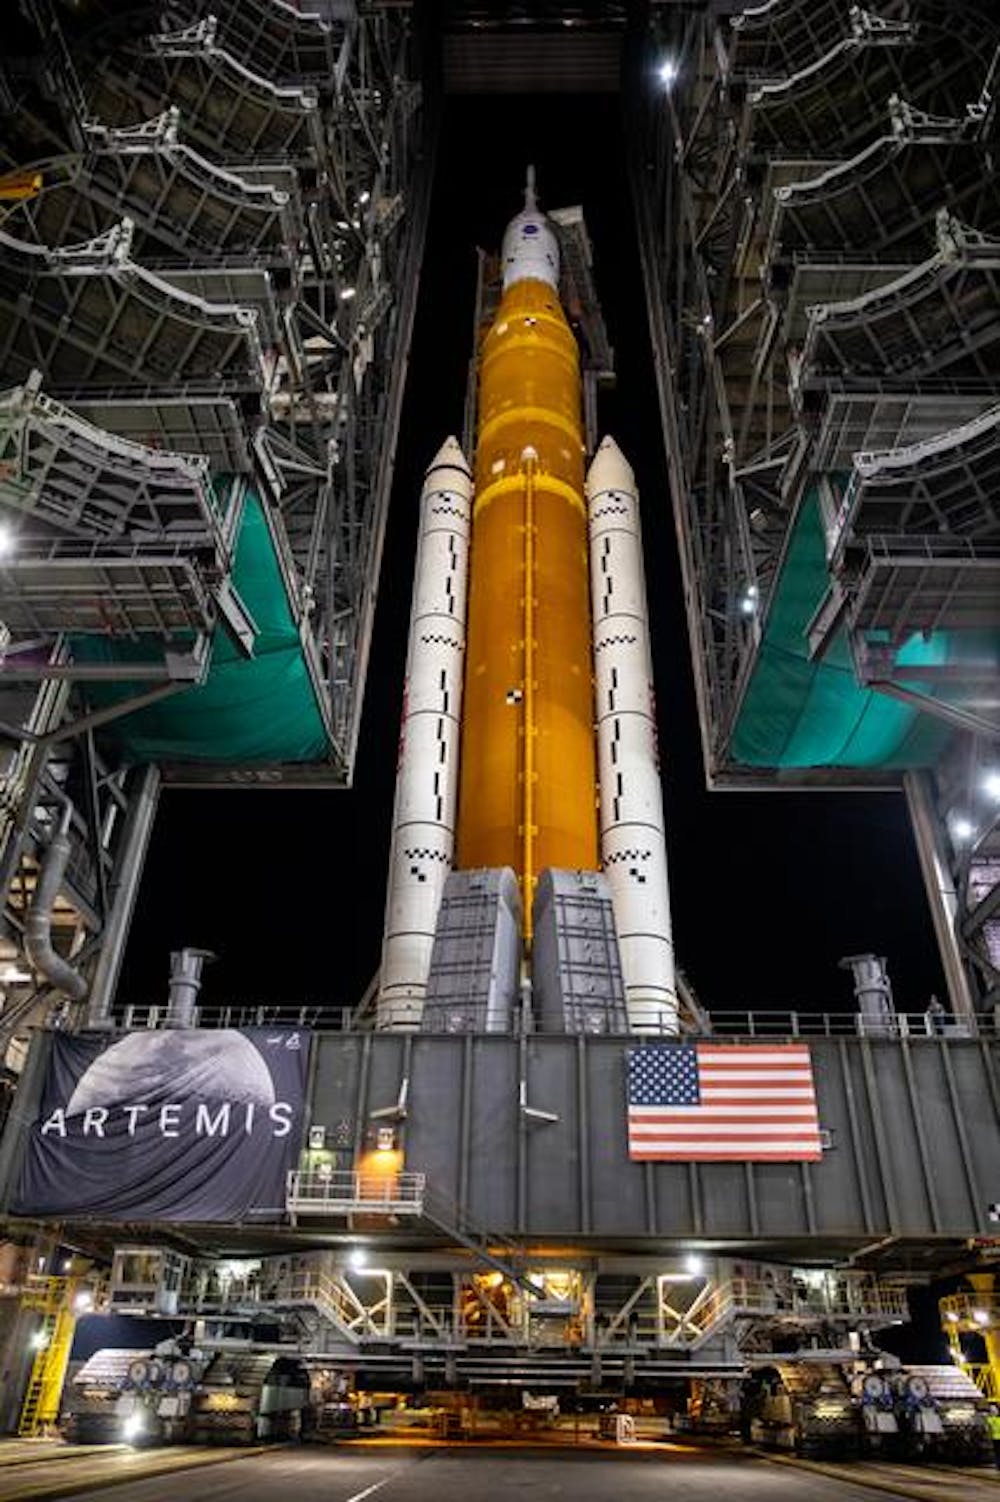 NASA Is About to Launch Its Most Powerful Rocket Ever. Here's What You